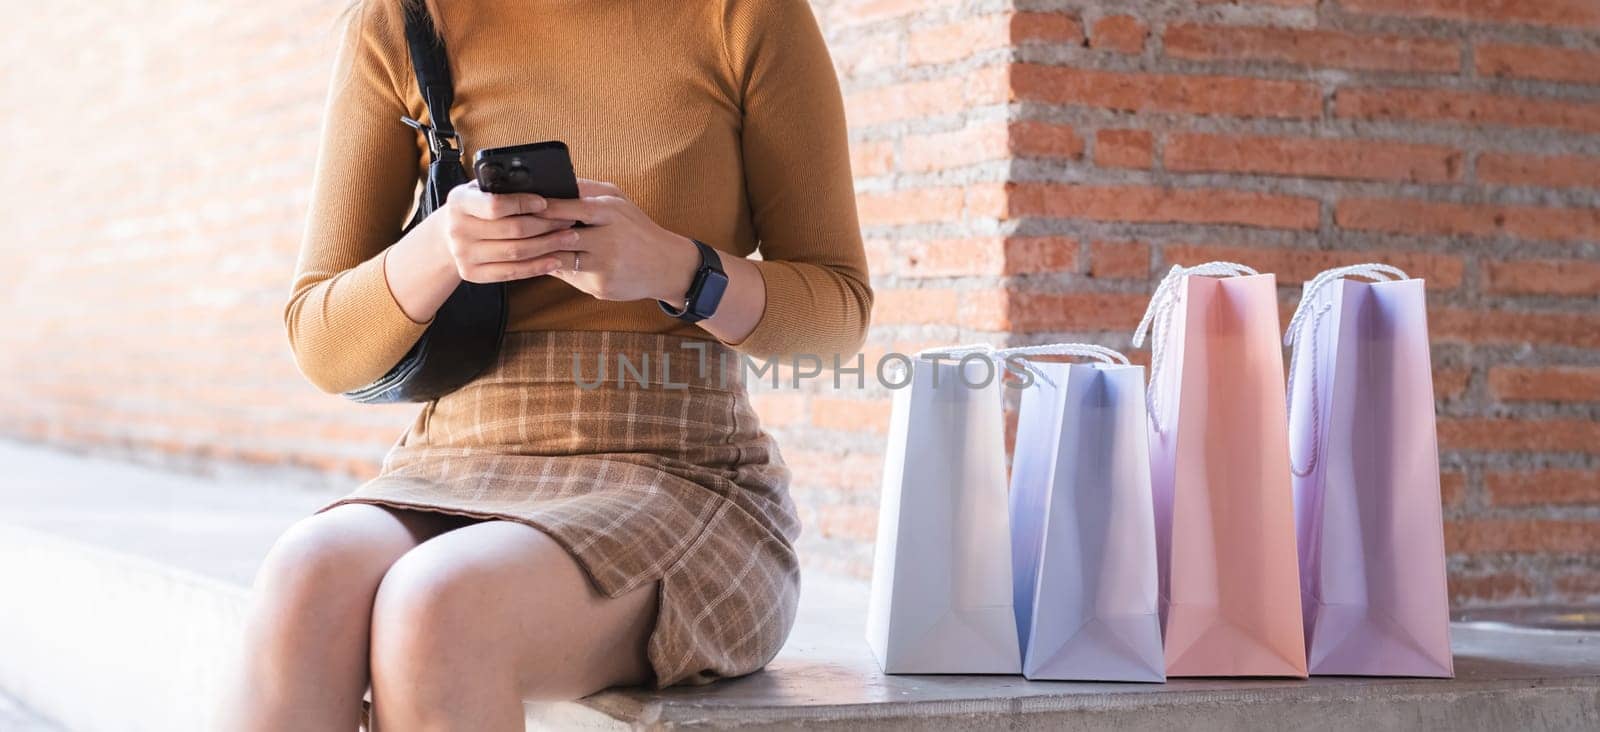 A woman sitting on a bench with a cell phone in her hand and a pink bag in front of her